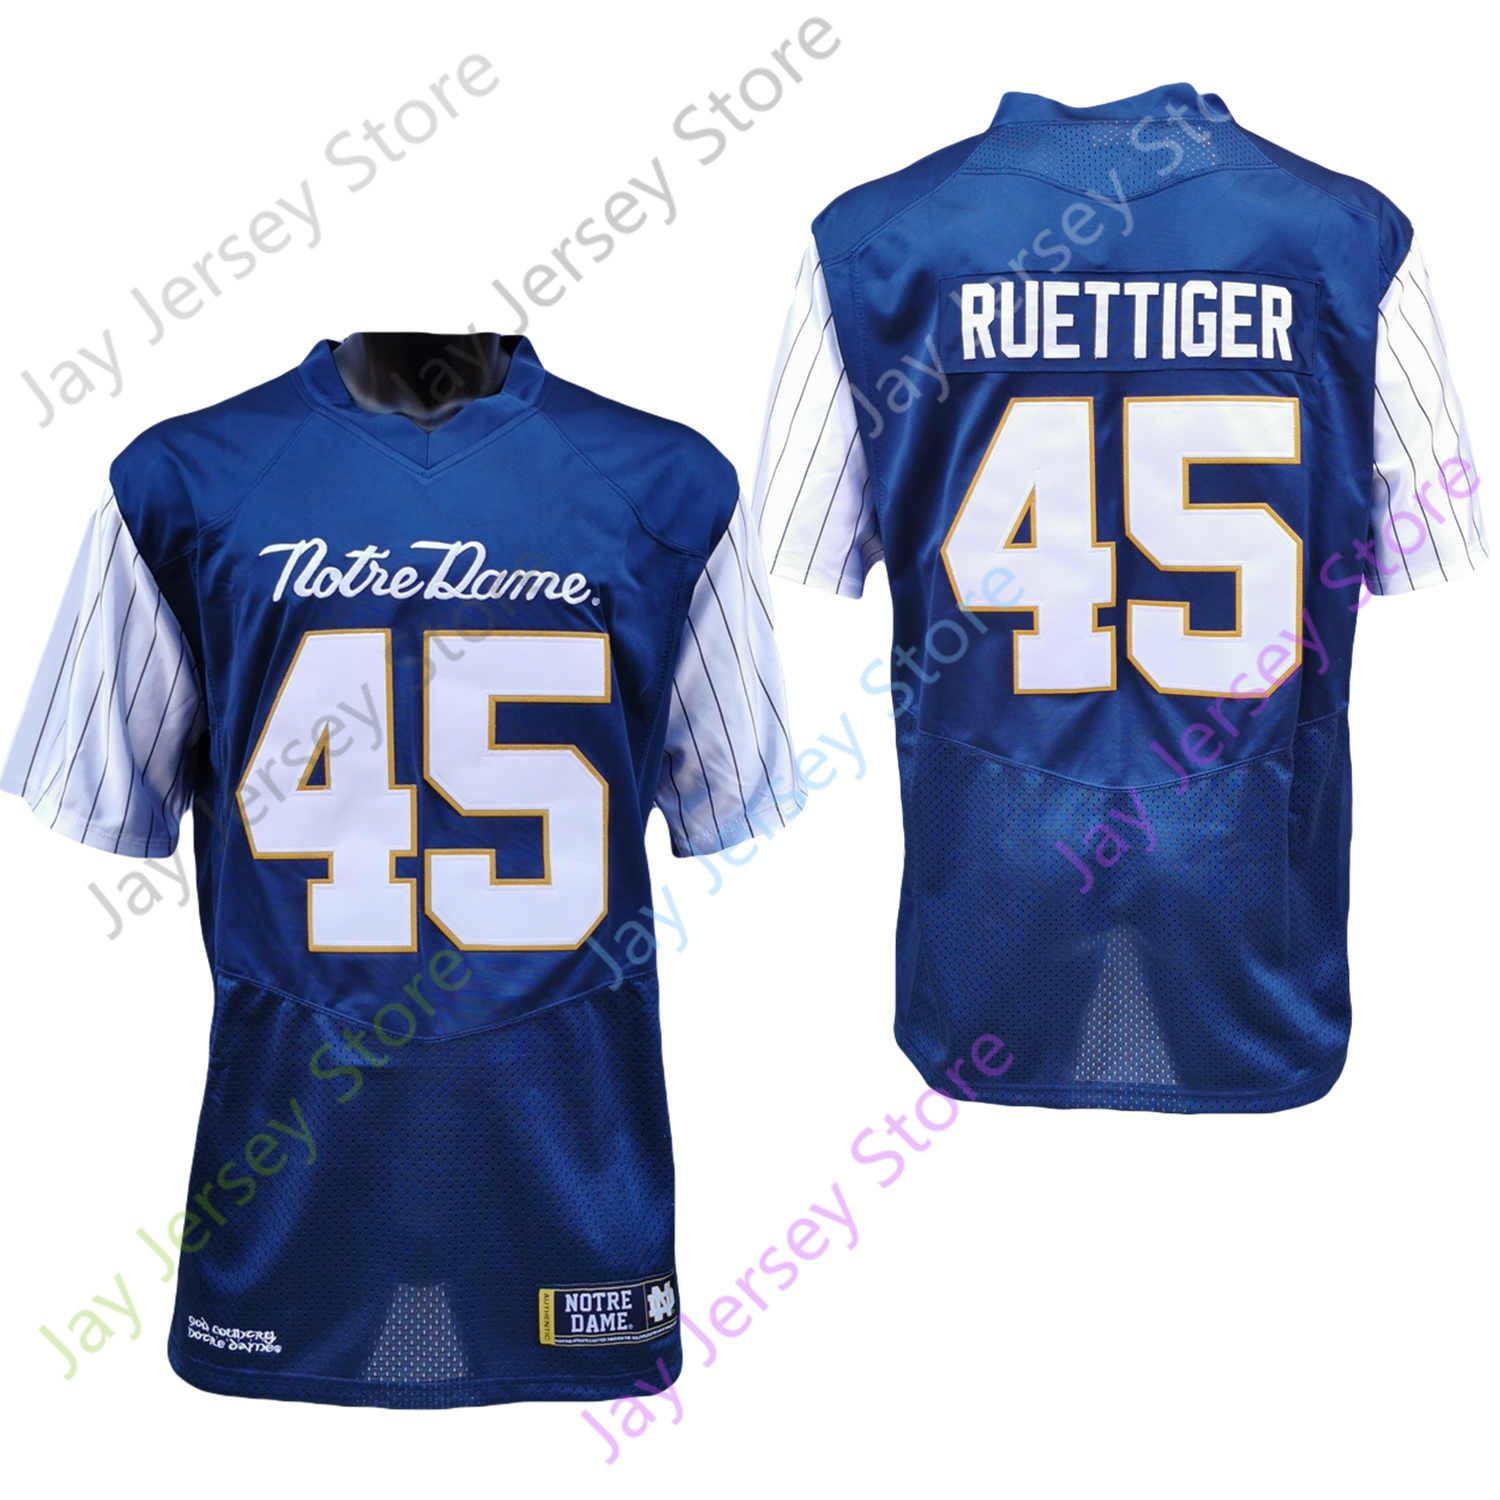 rudy notre dame jersey